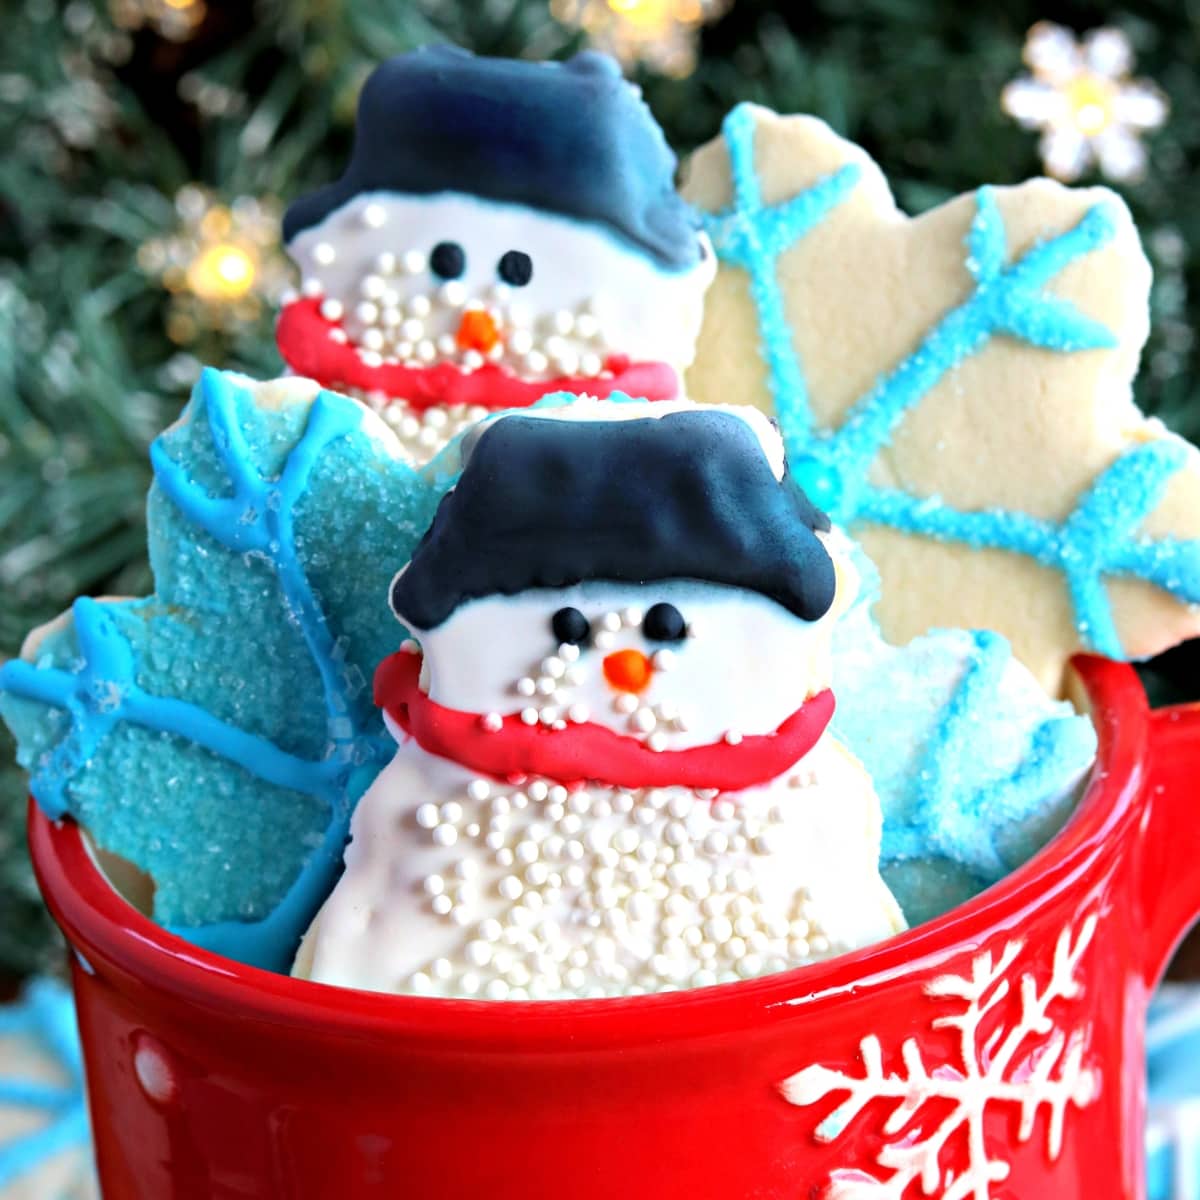 gluten-free cut out sugar cookies in a red coffee cup